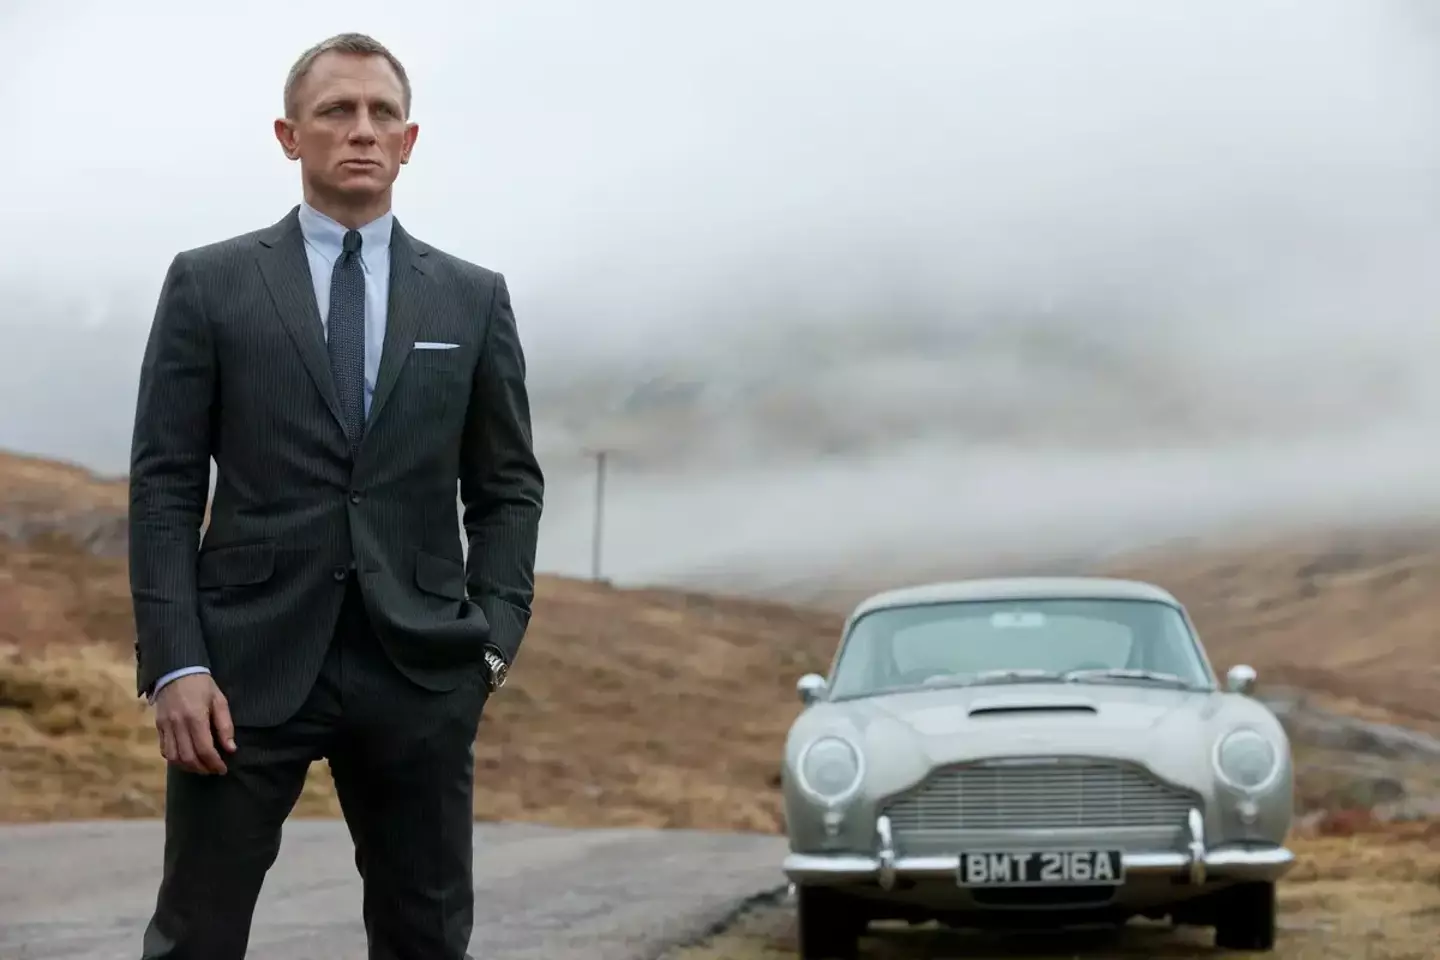 Daniel Craig is the latest actor to portray 007.